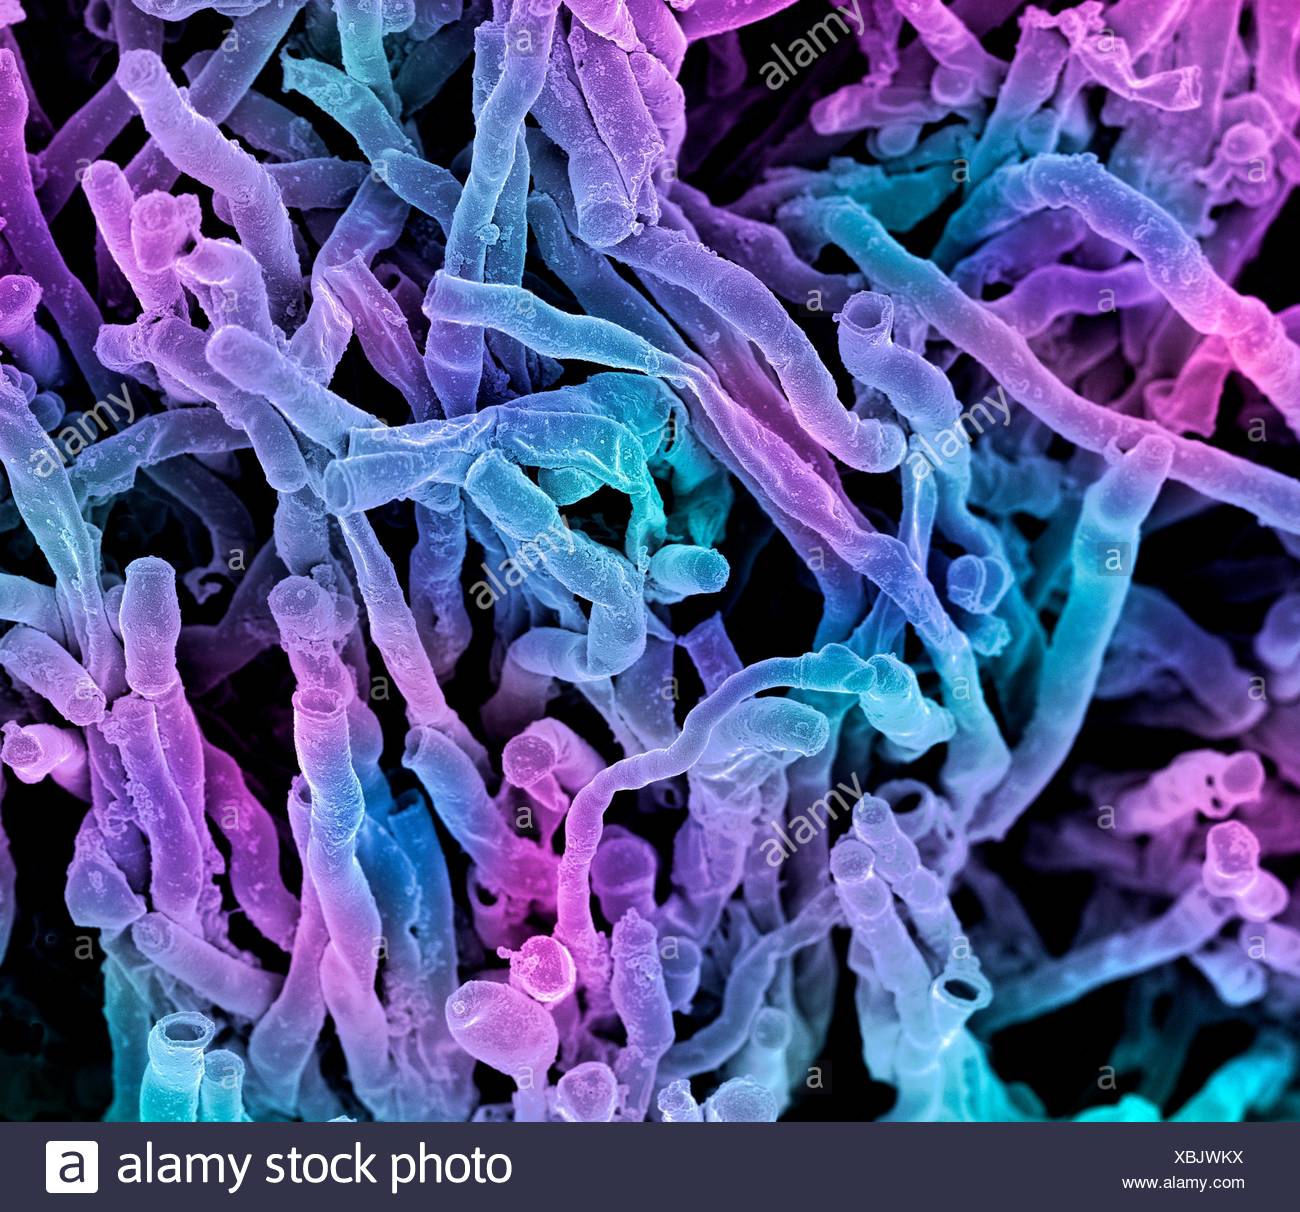 Actinomyces Viscosus Bacteria High Resolution Stock Photography and ...